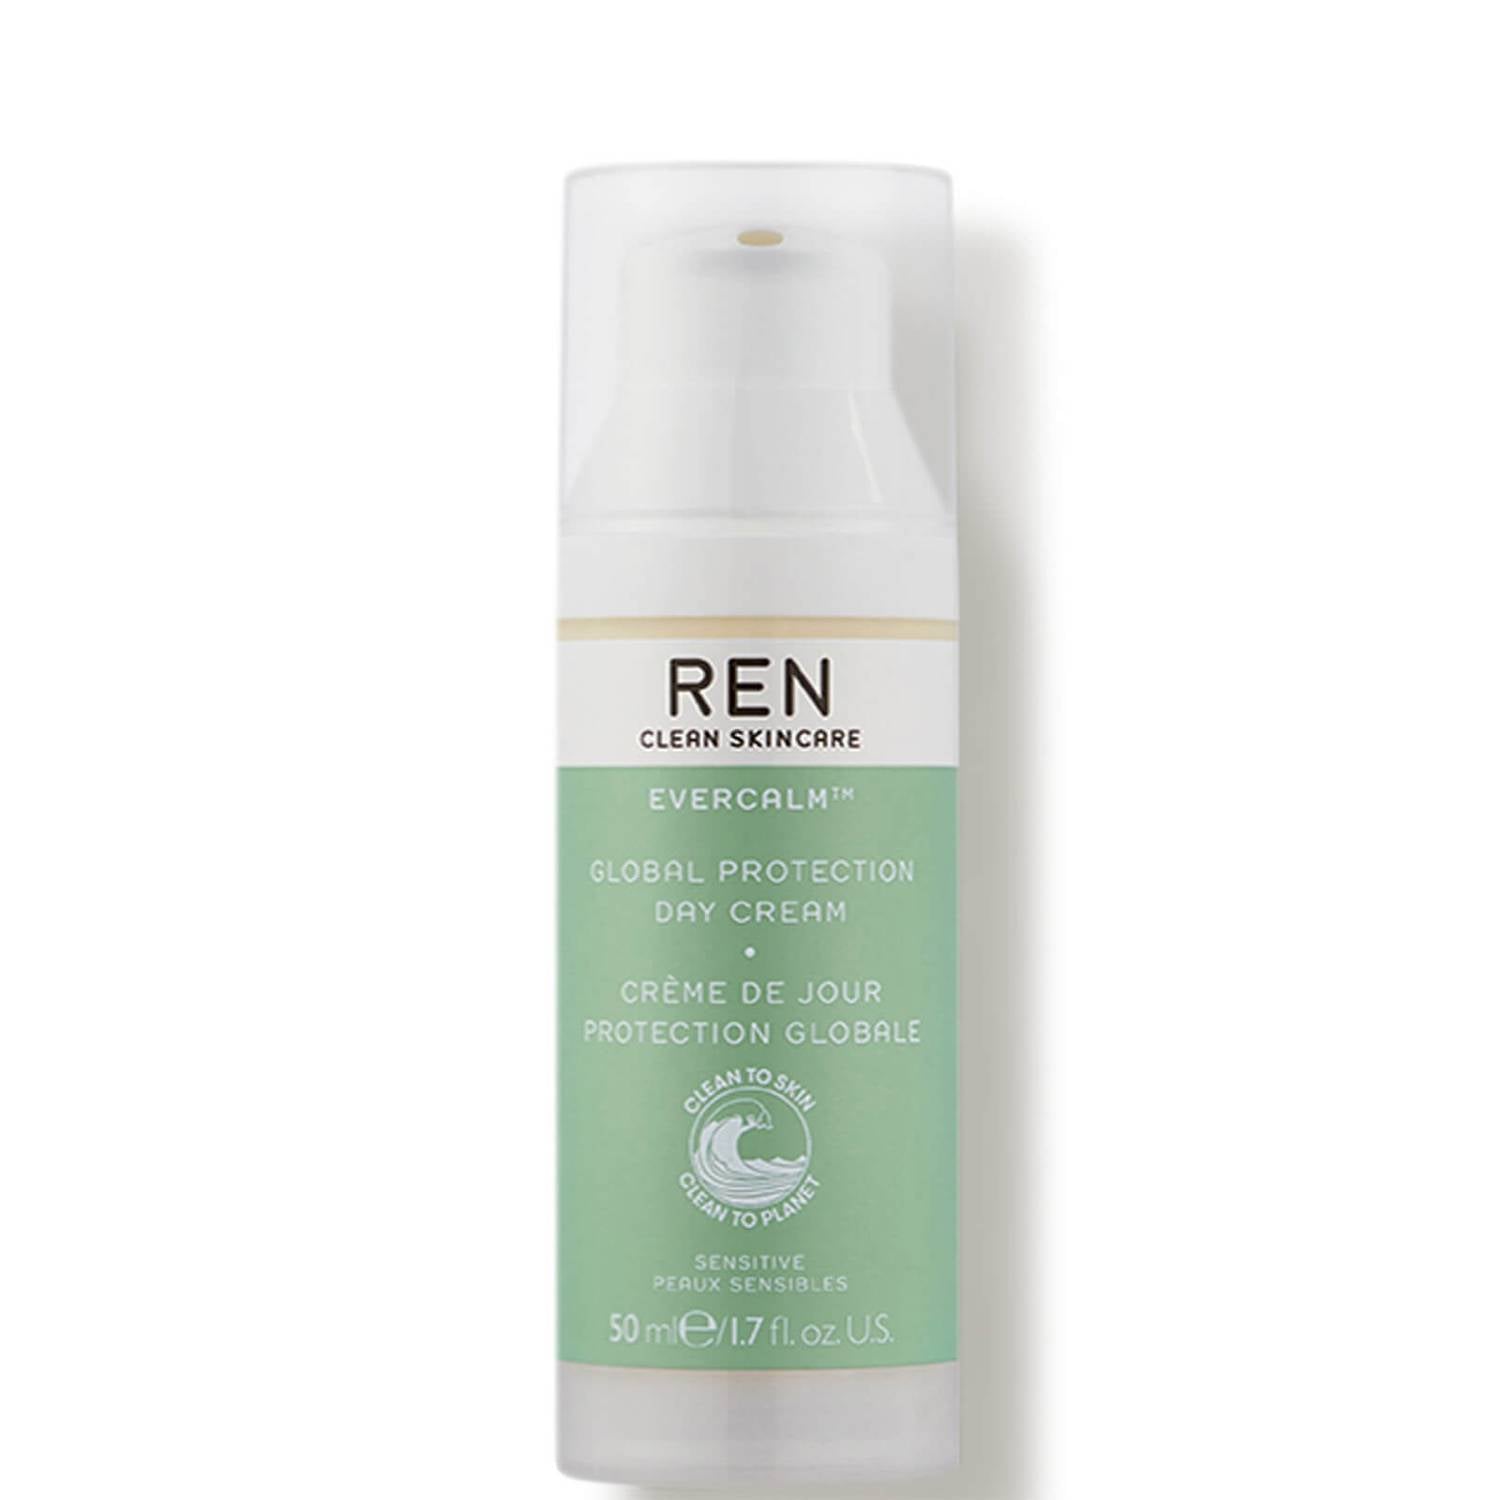 Evercalm Global Protection day cream by REN Skincare provides daily protection to help safeguard the skin against the main indications of sensitivity, offering instant calming, hydration, and suppleness.